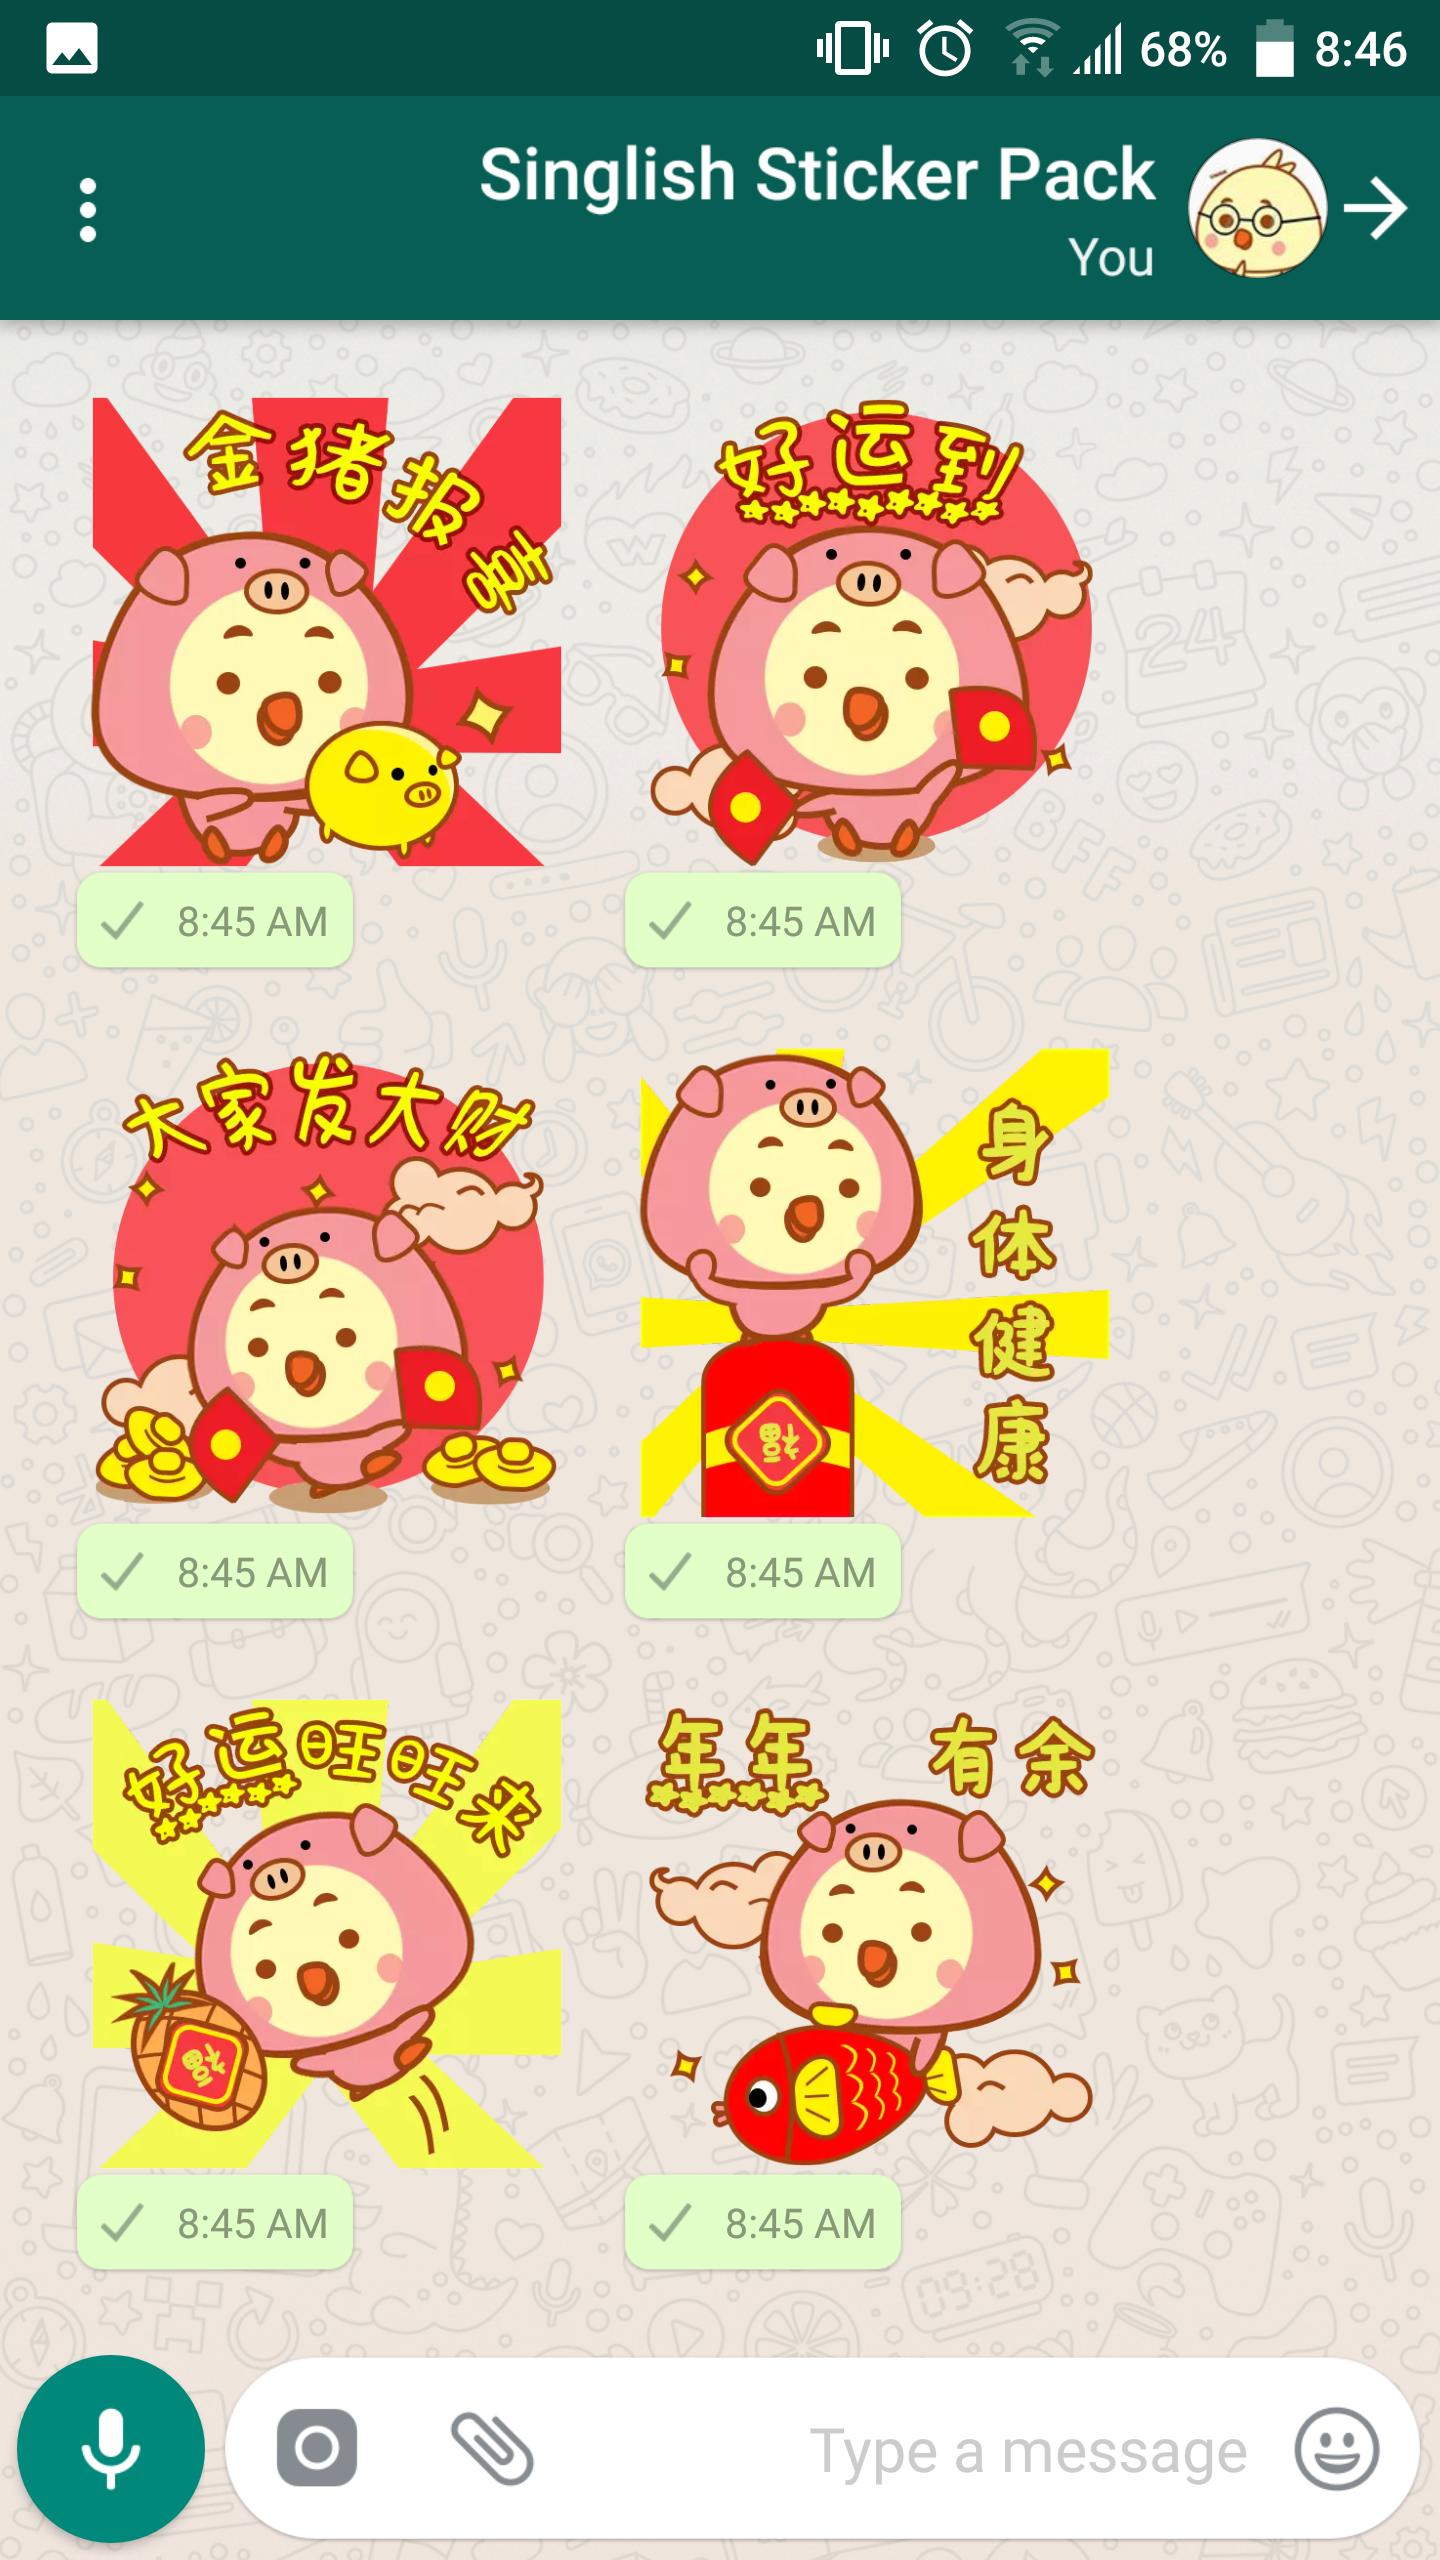 Singlish Stickers For Android Apk Download